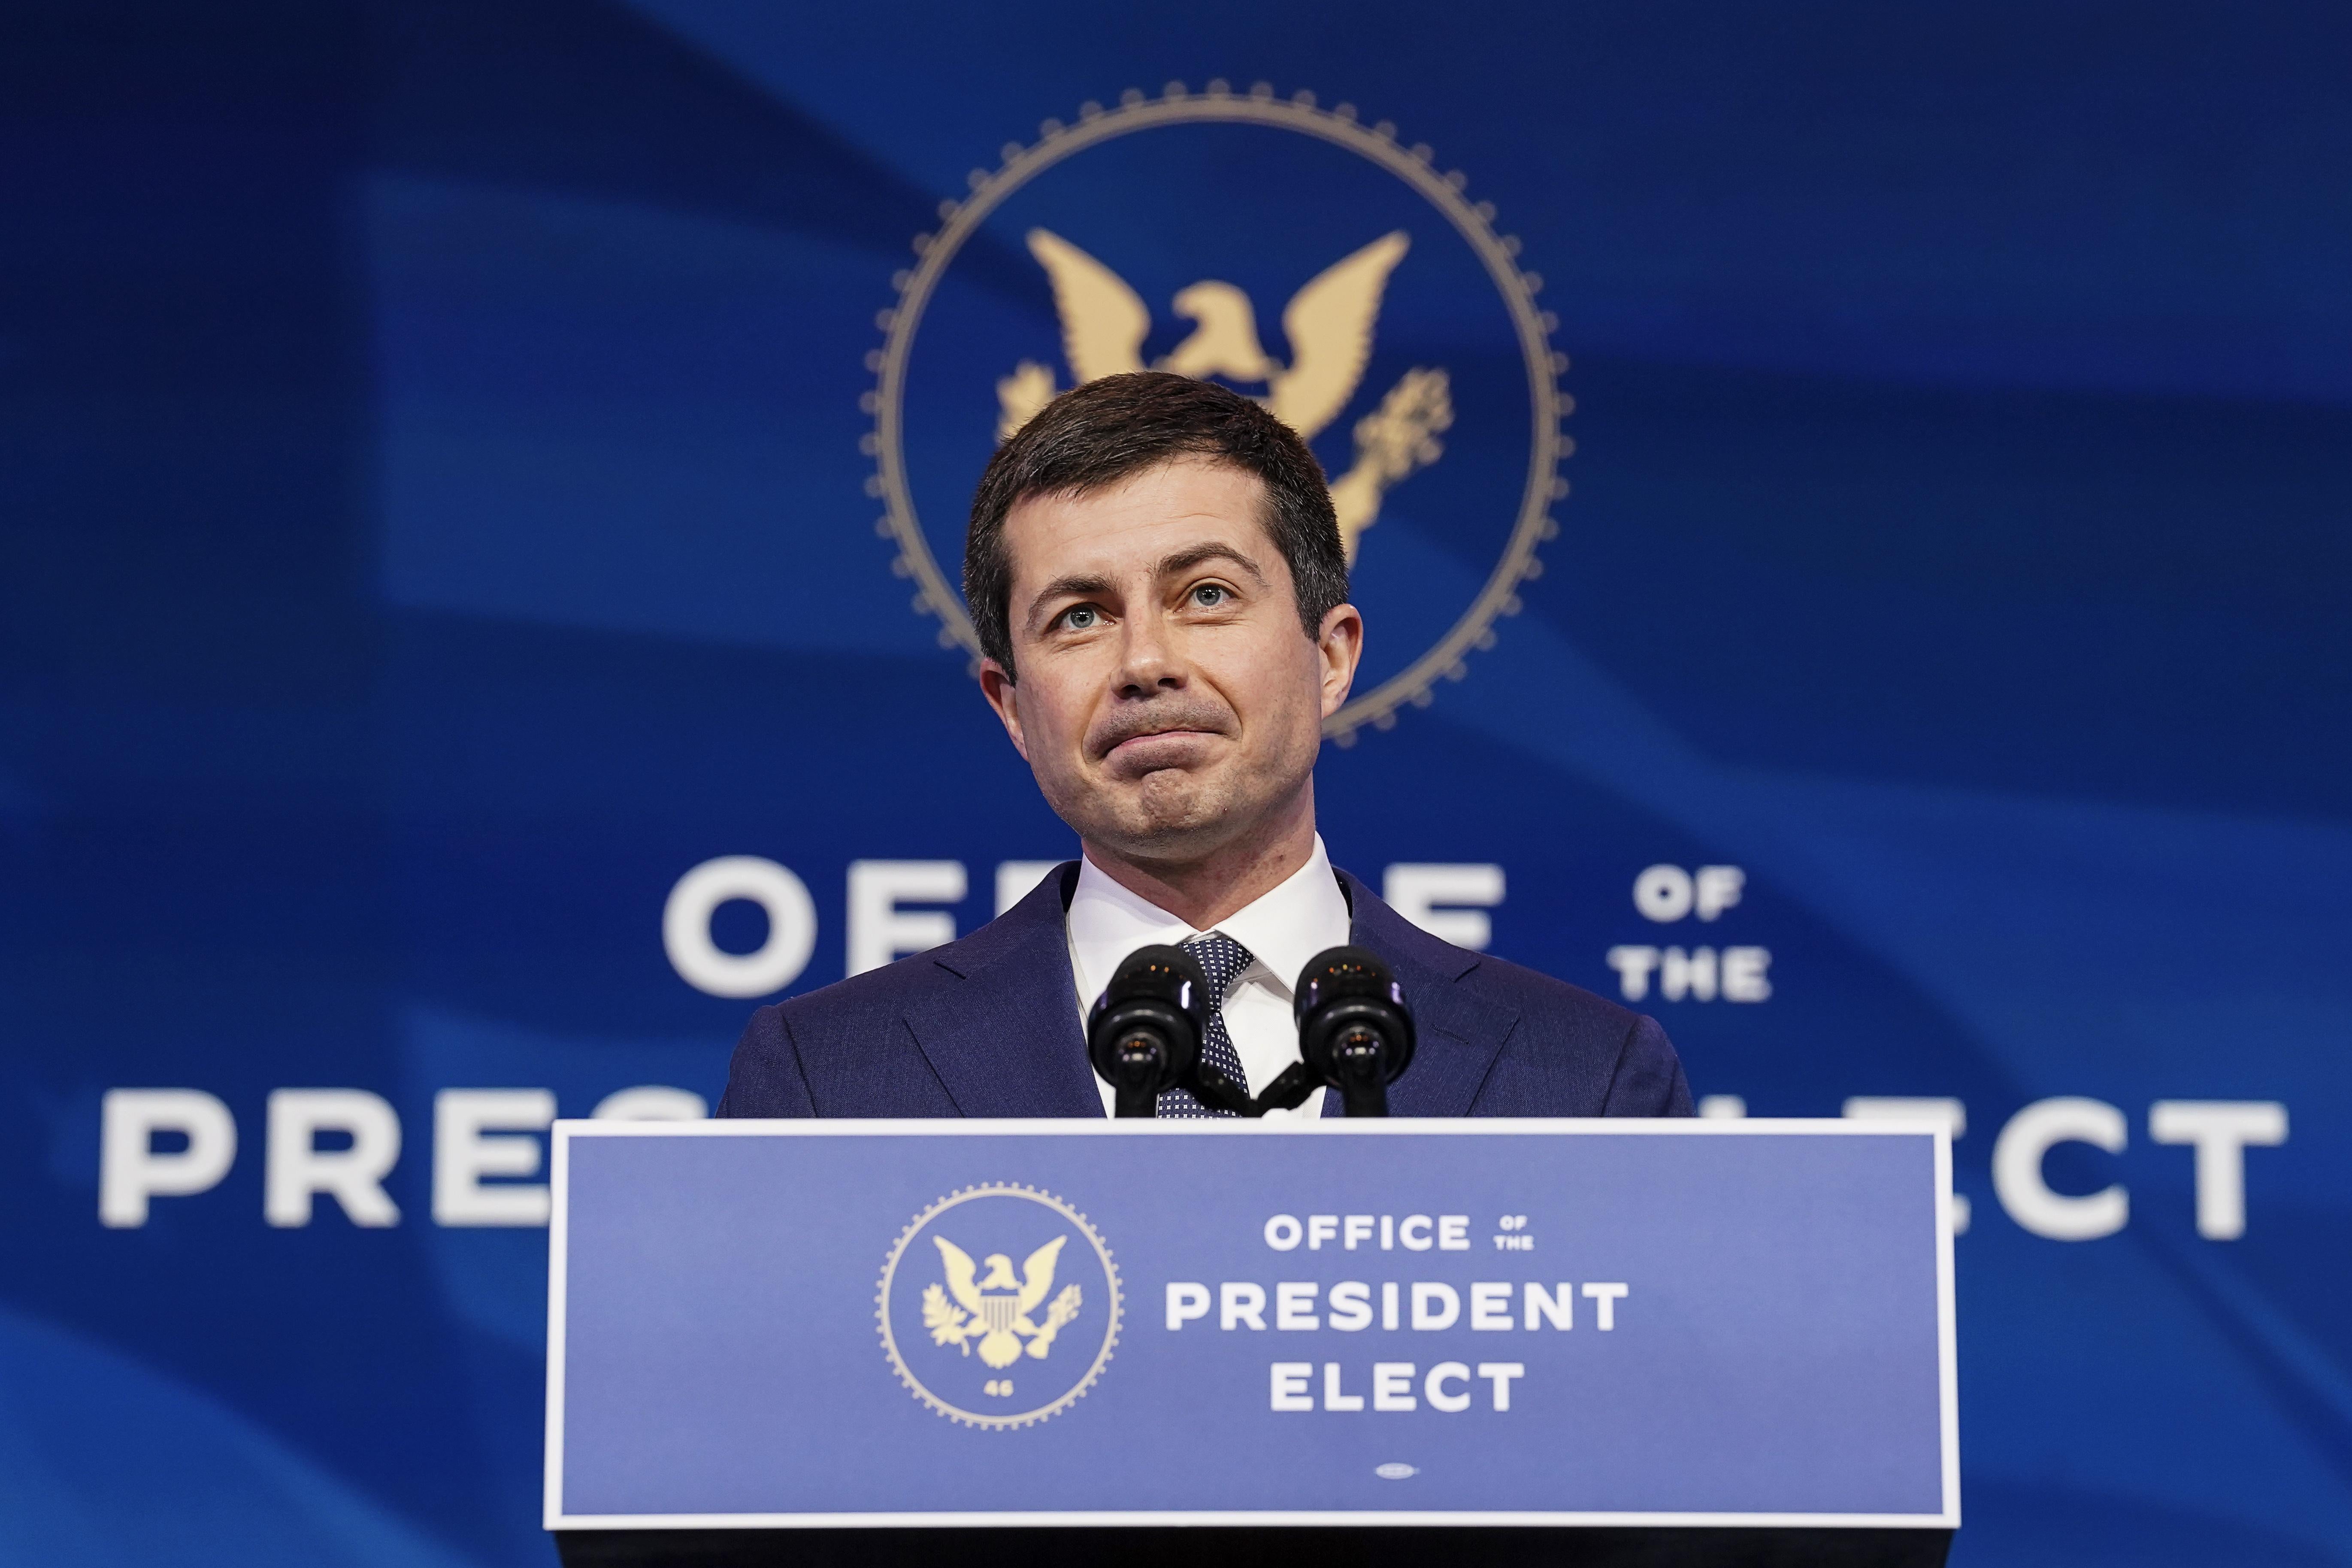 Pete Buttigieg stands onstage at a podium marked Office of the President Elect